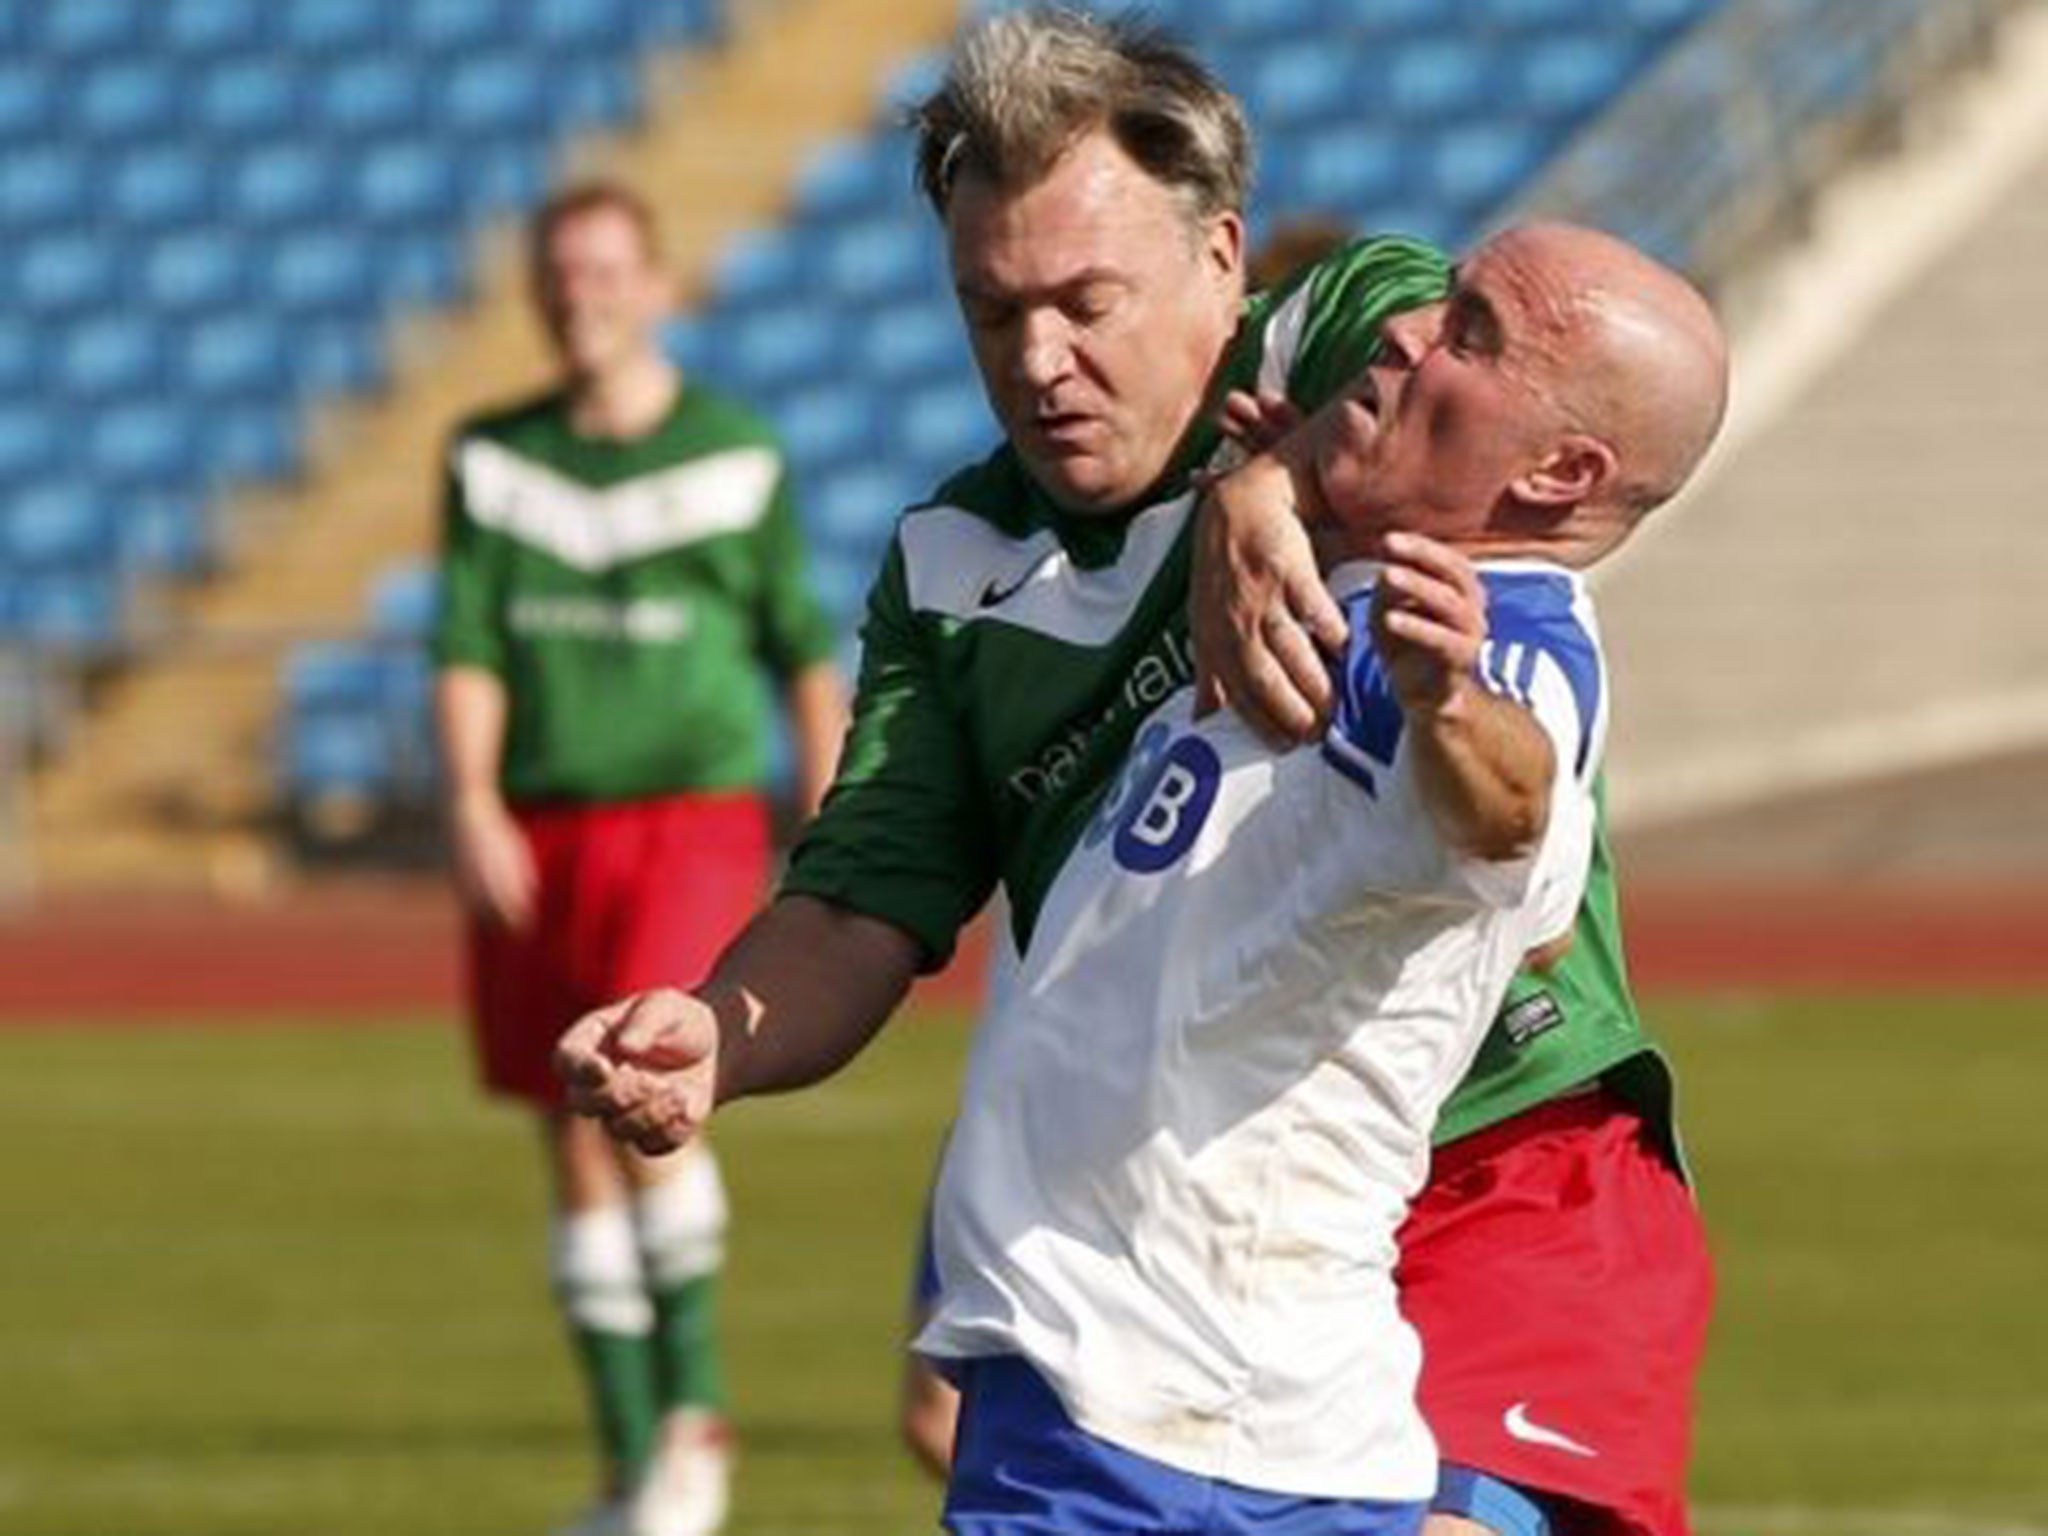 Britain's shadow chancellor Ed Balls (L) challenges reporter Rob Merrick for the ball during the Labour Party versus the media soccer match,